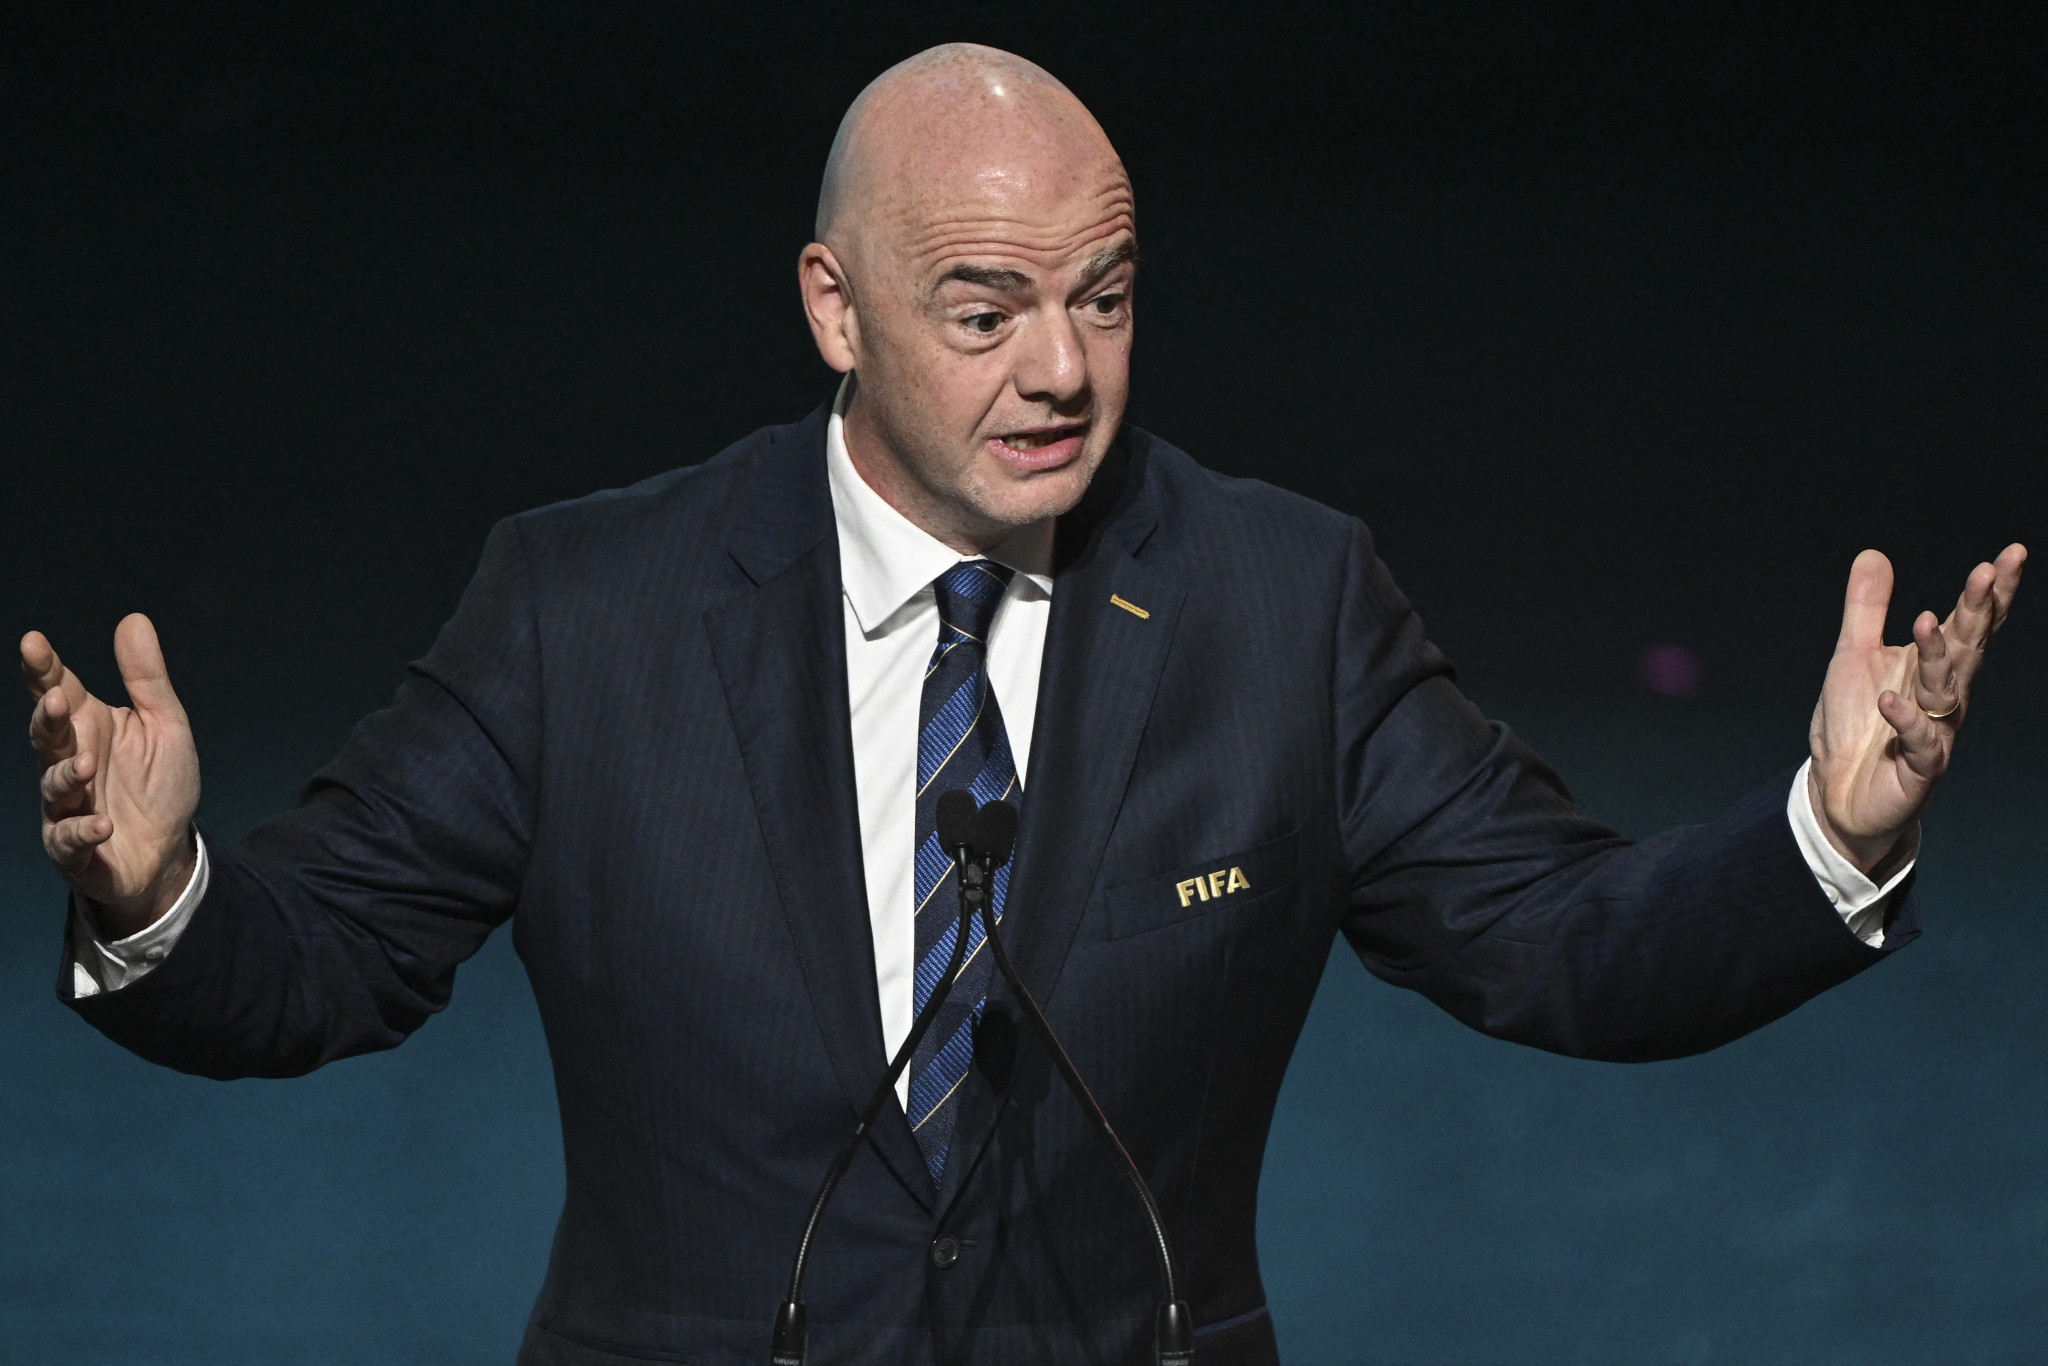 Infantino set for uncontested re-election as FIFA President 